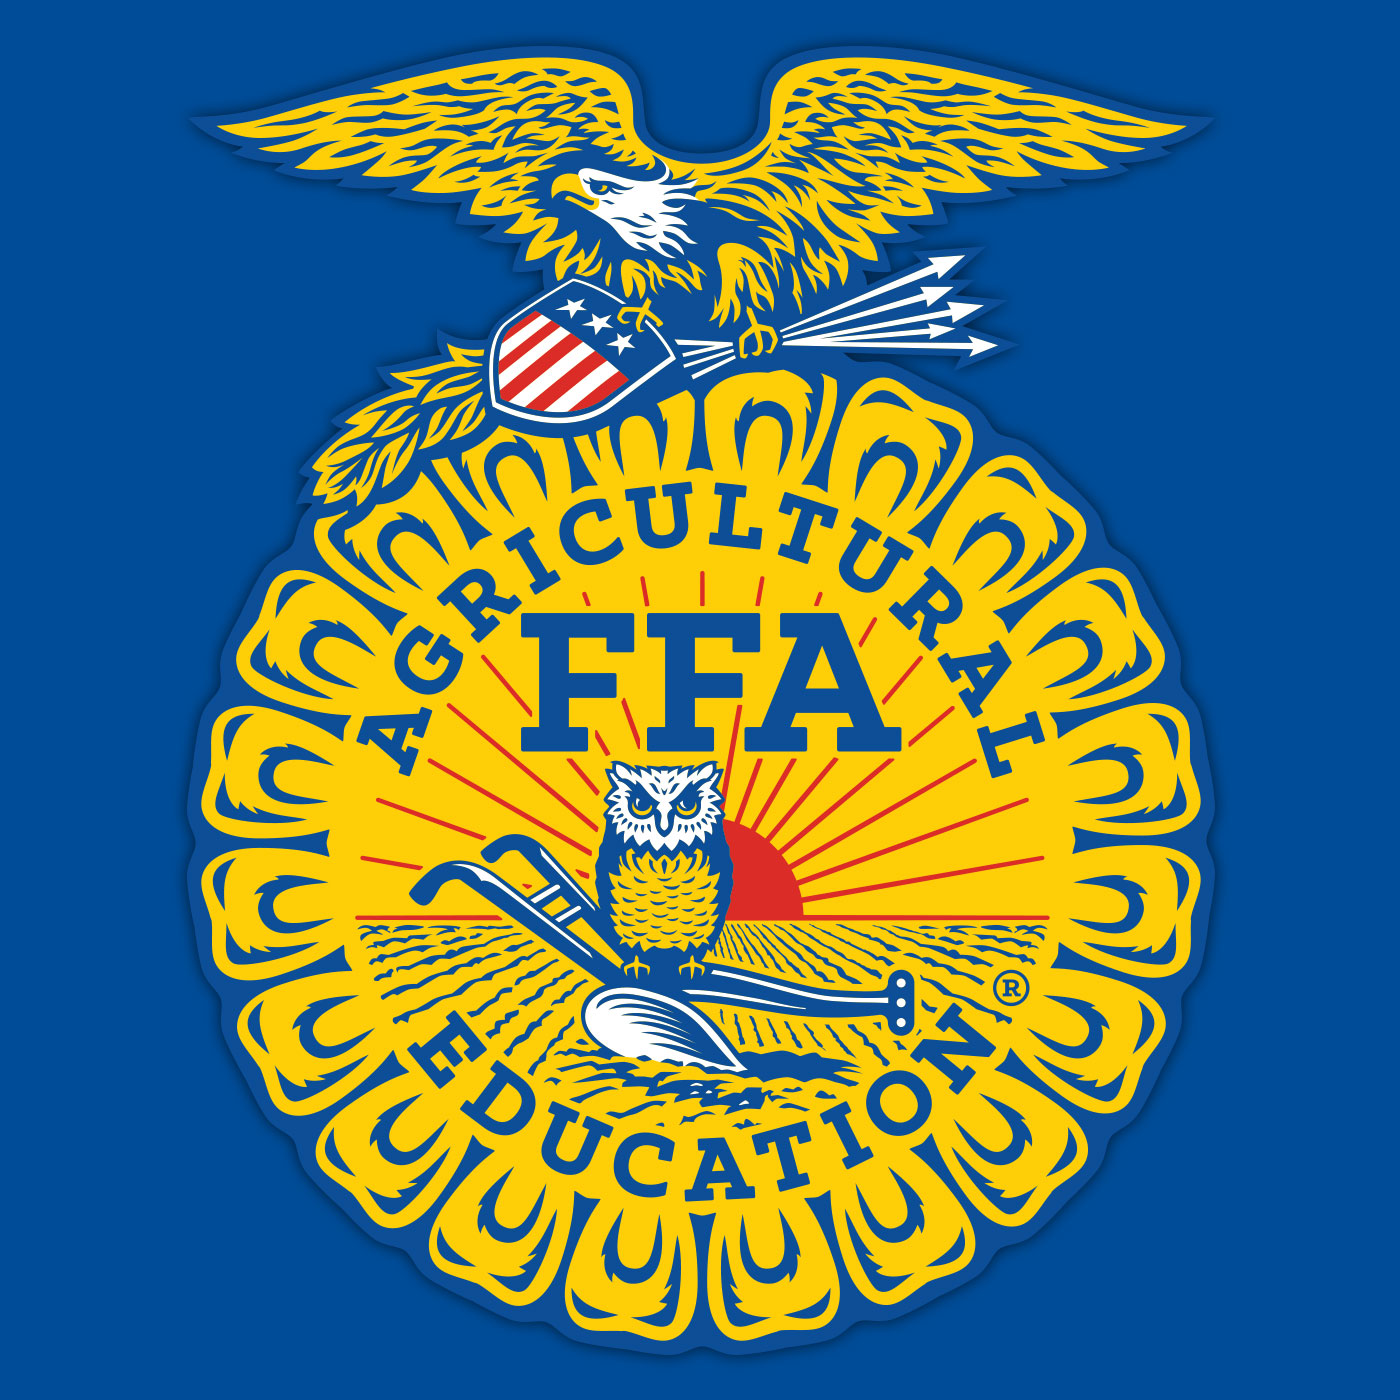 National FFA Presents Bill to Amend Federal Charter to Strengthen Industry Ties and Reflect Growth